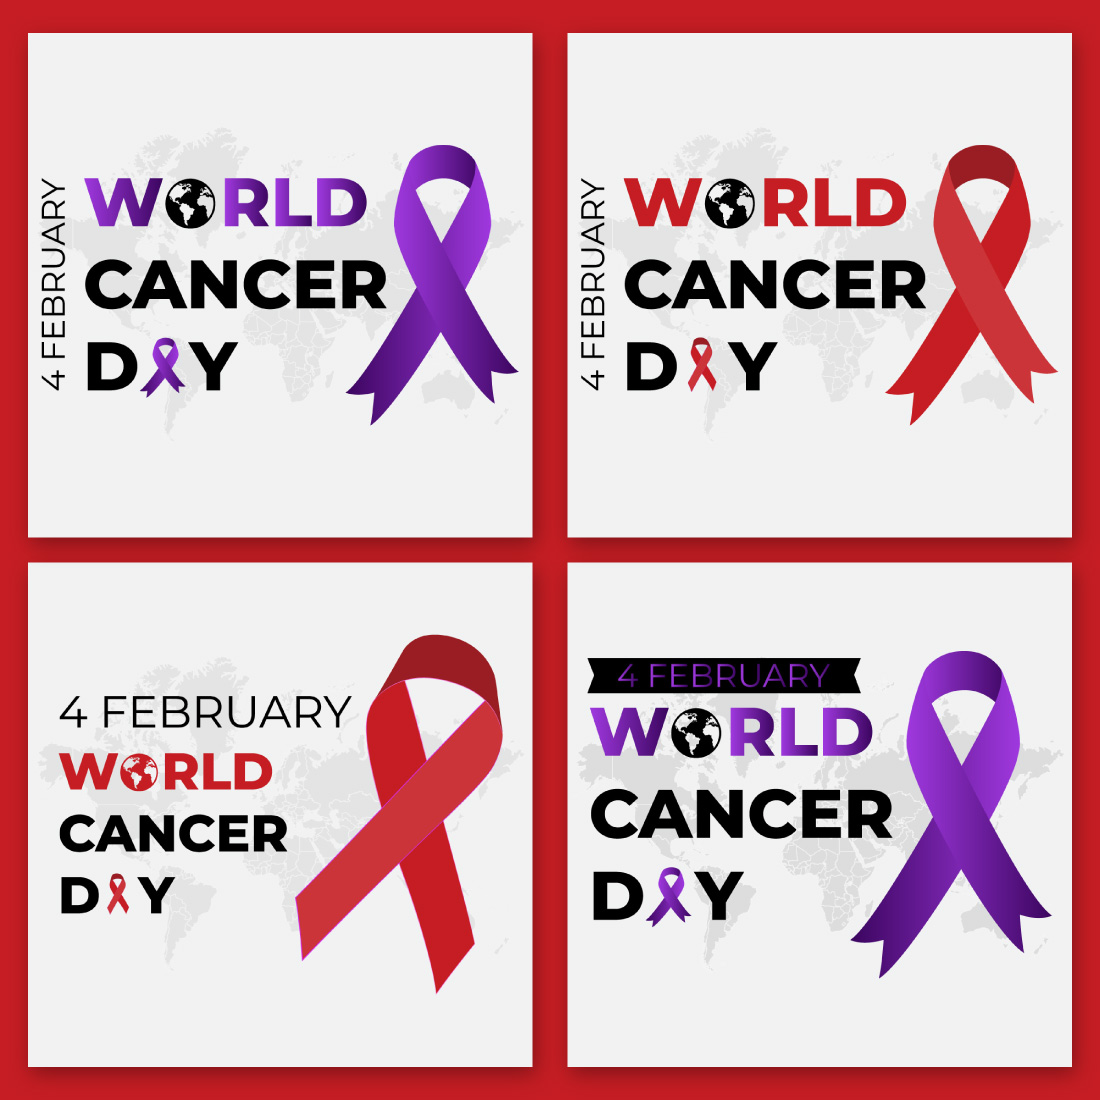 4th February World Cancer Day Background Design cover image.